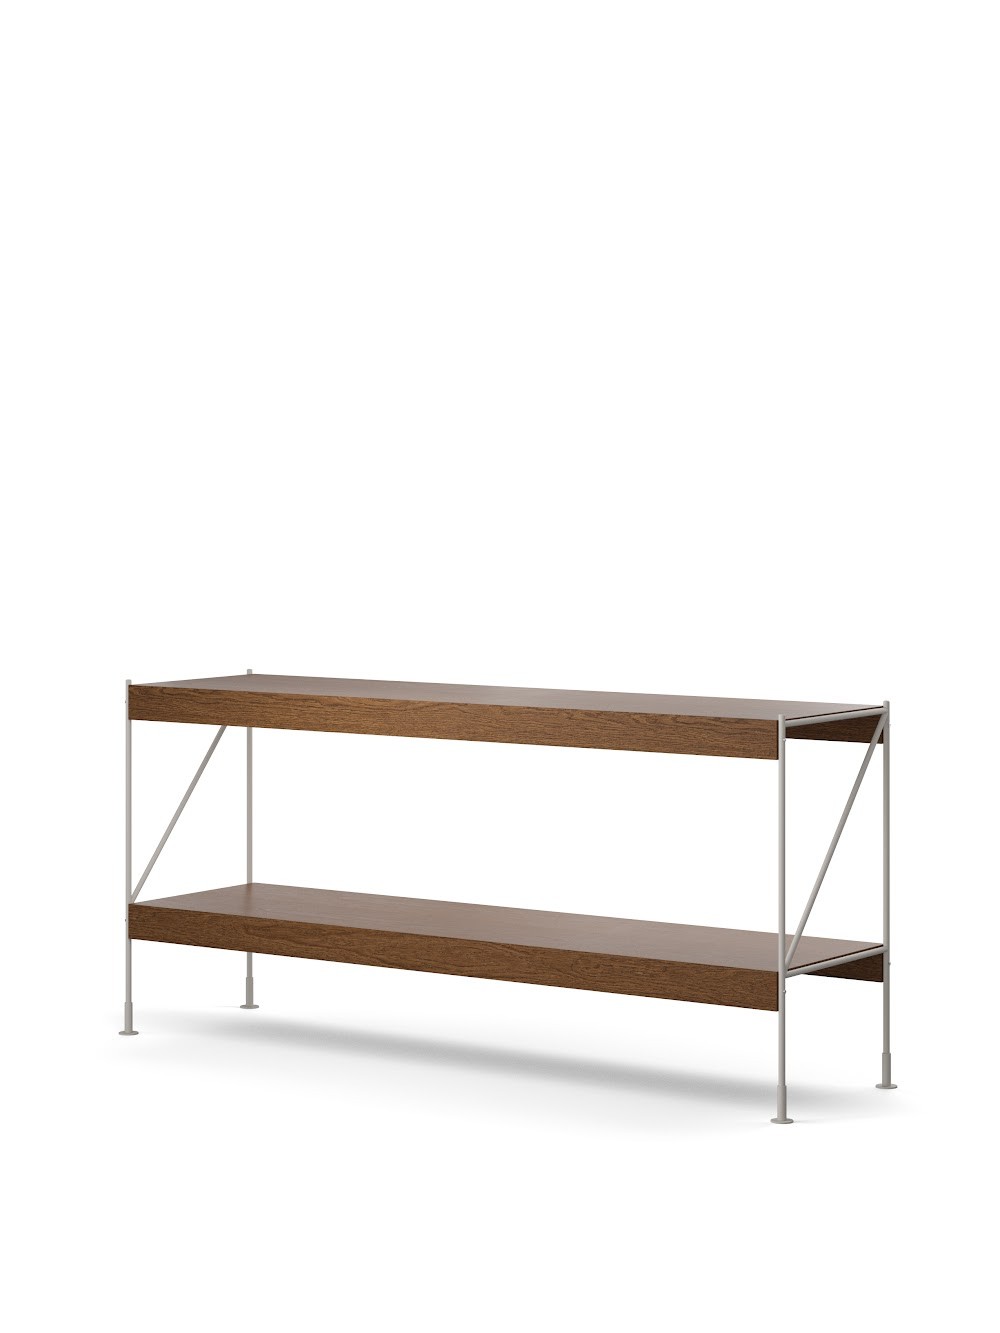 a wooden shelf with metal legs on a white background